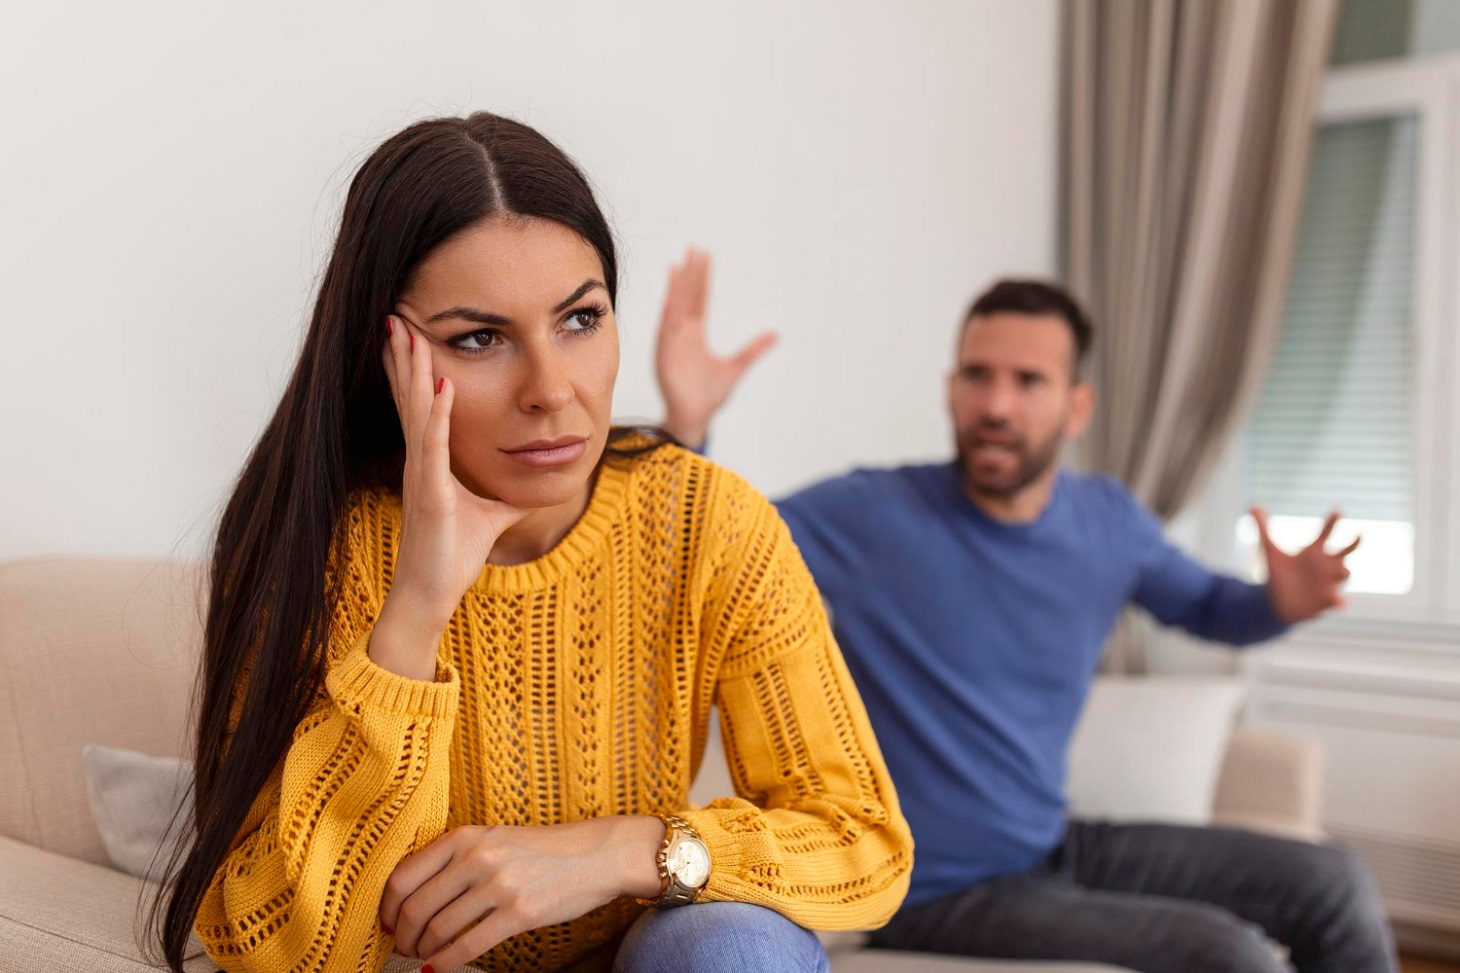 young-couple-having-argument-conflict-bad-relationships-angry-fury-woman-angry-young-couple-sit-couch-living-room-having-family-fight-quarrel-suffer-from-misunderstanding_stefamerpik_freepik.jpg